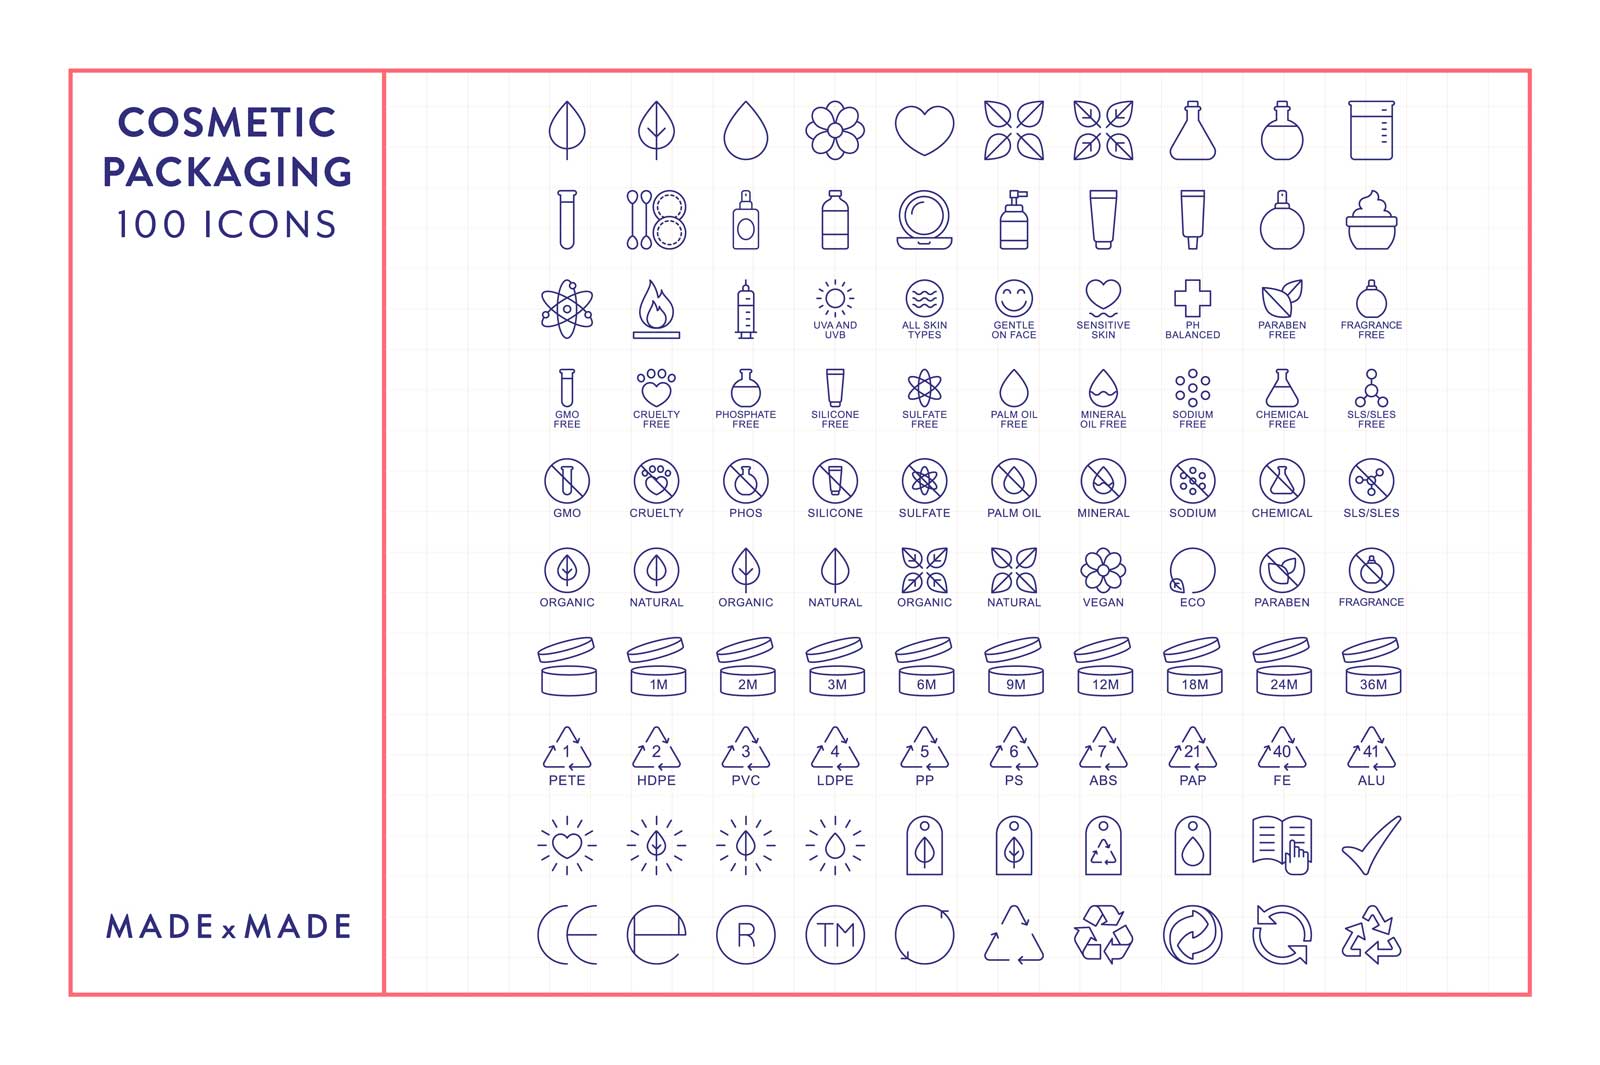 made x made icons cosmetic packaging, collection overview – consistent icons and symbols for beauty, packaging, industry standards, recycling, use by, and free from, natural, organic